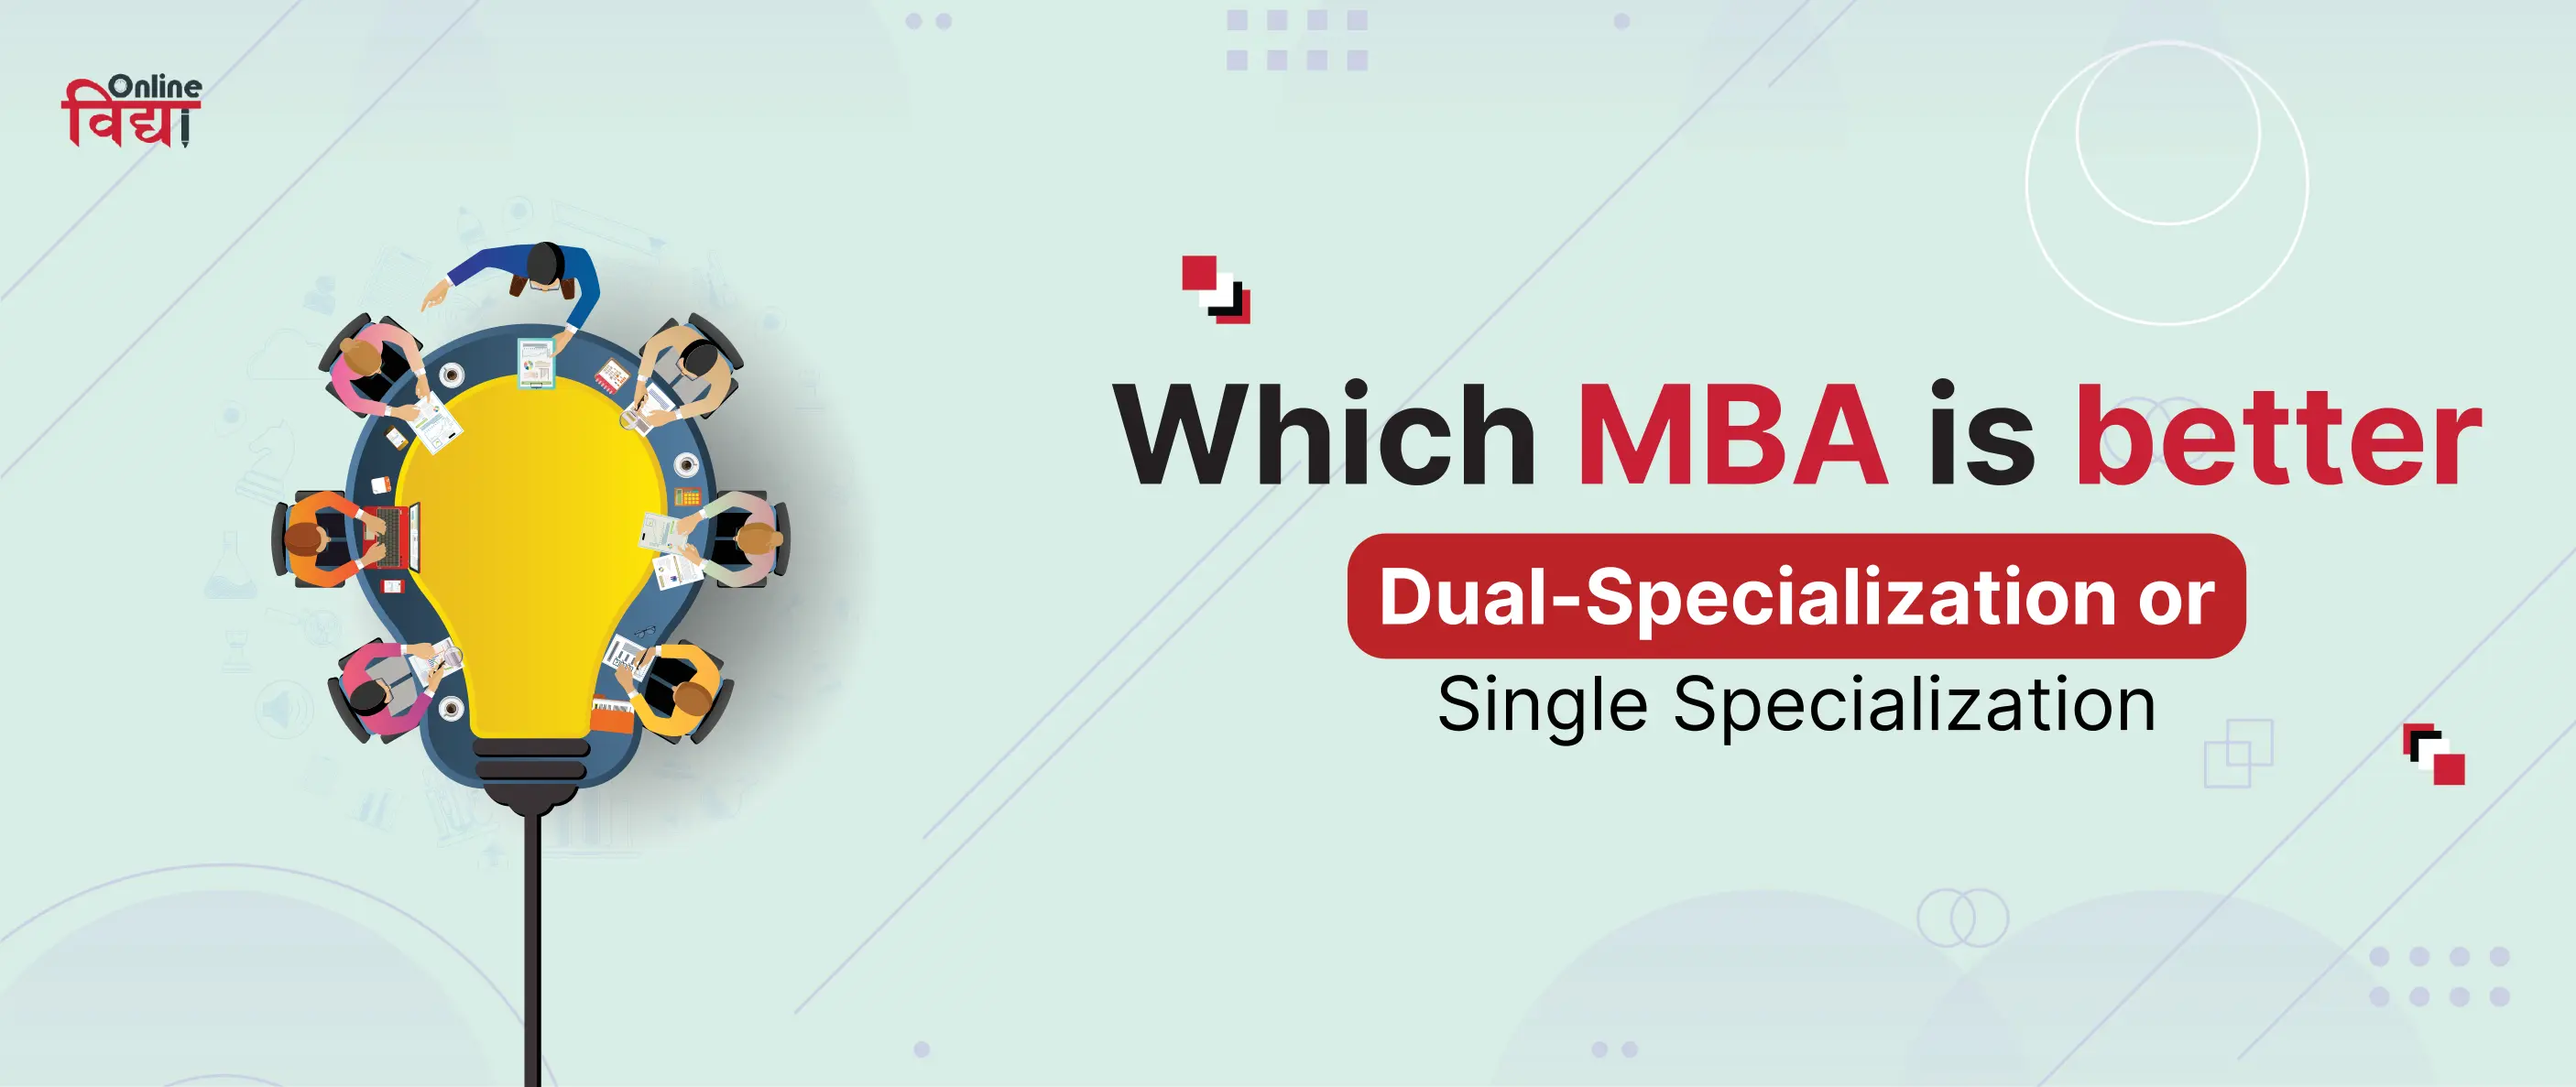 Which MBA is better dual-specialization or single specialization